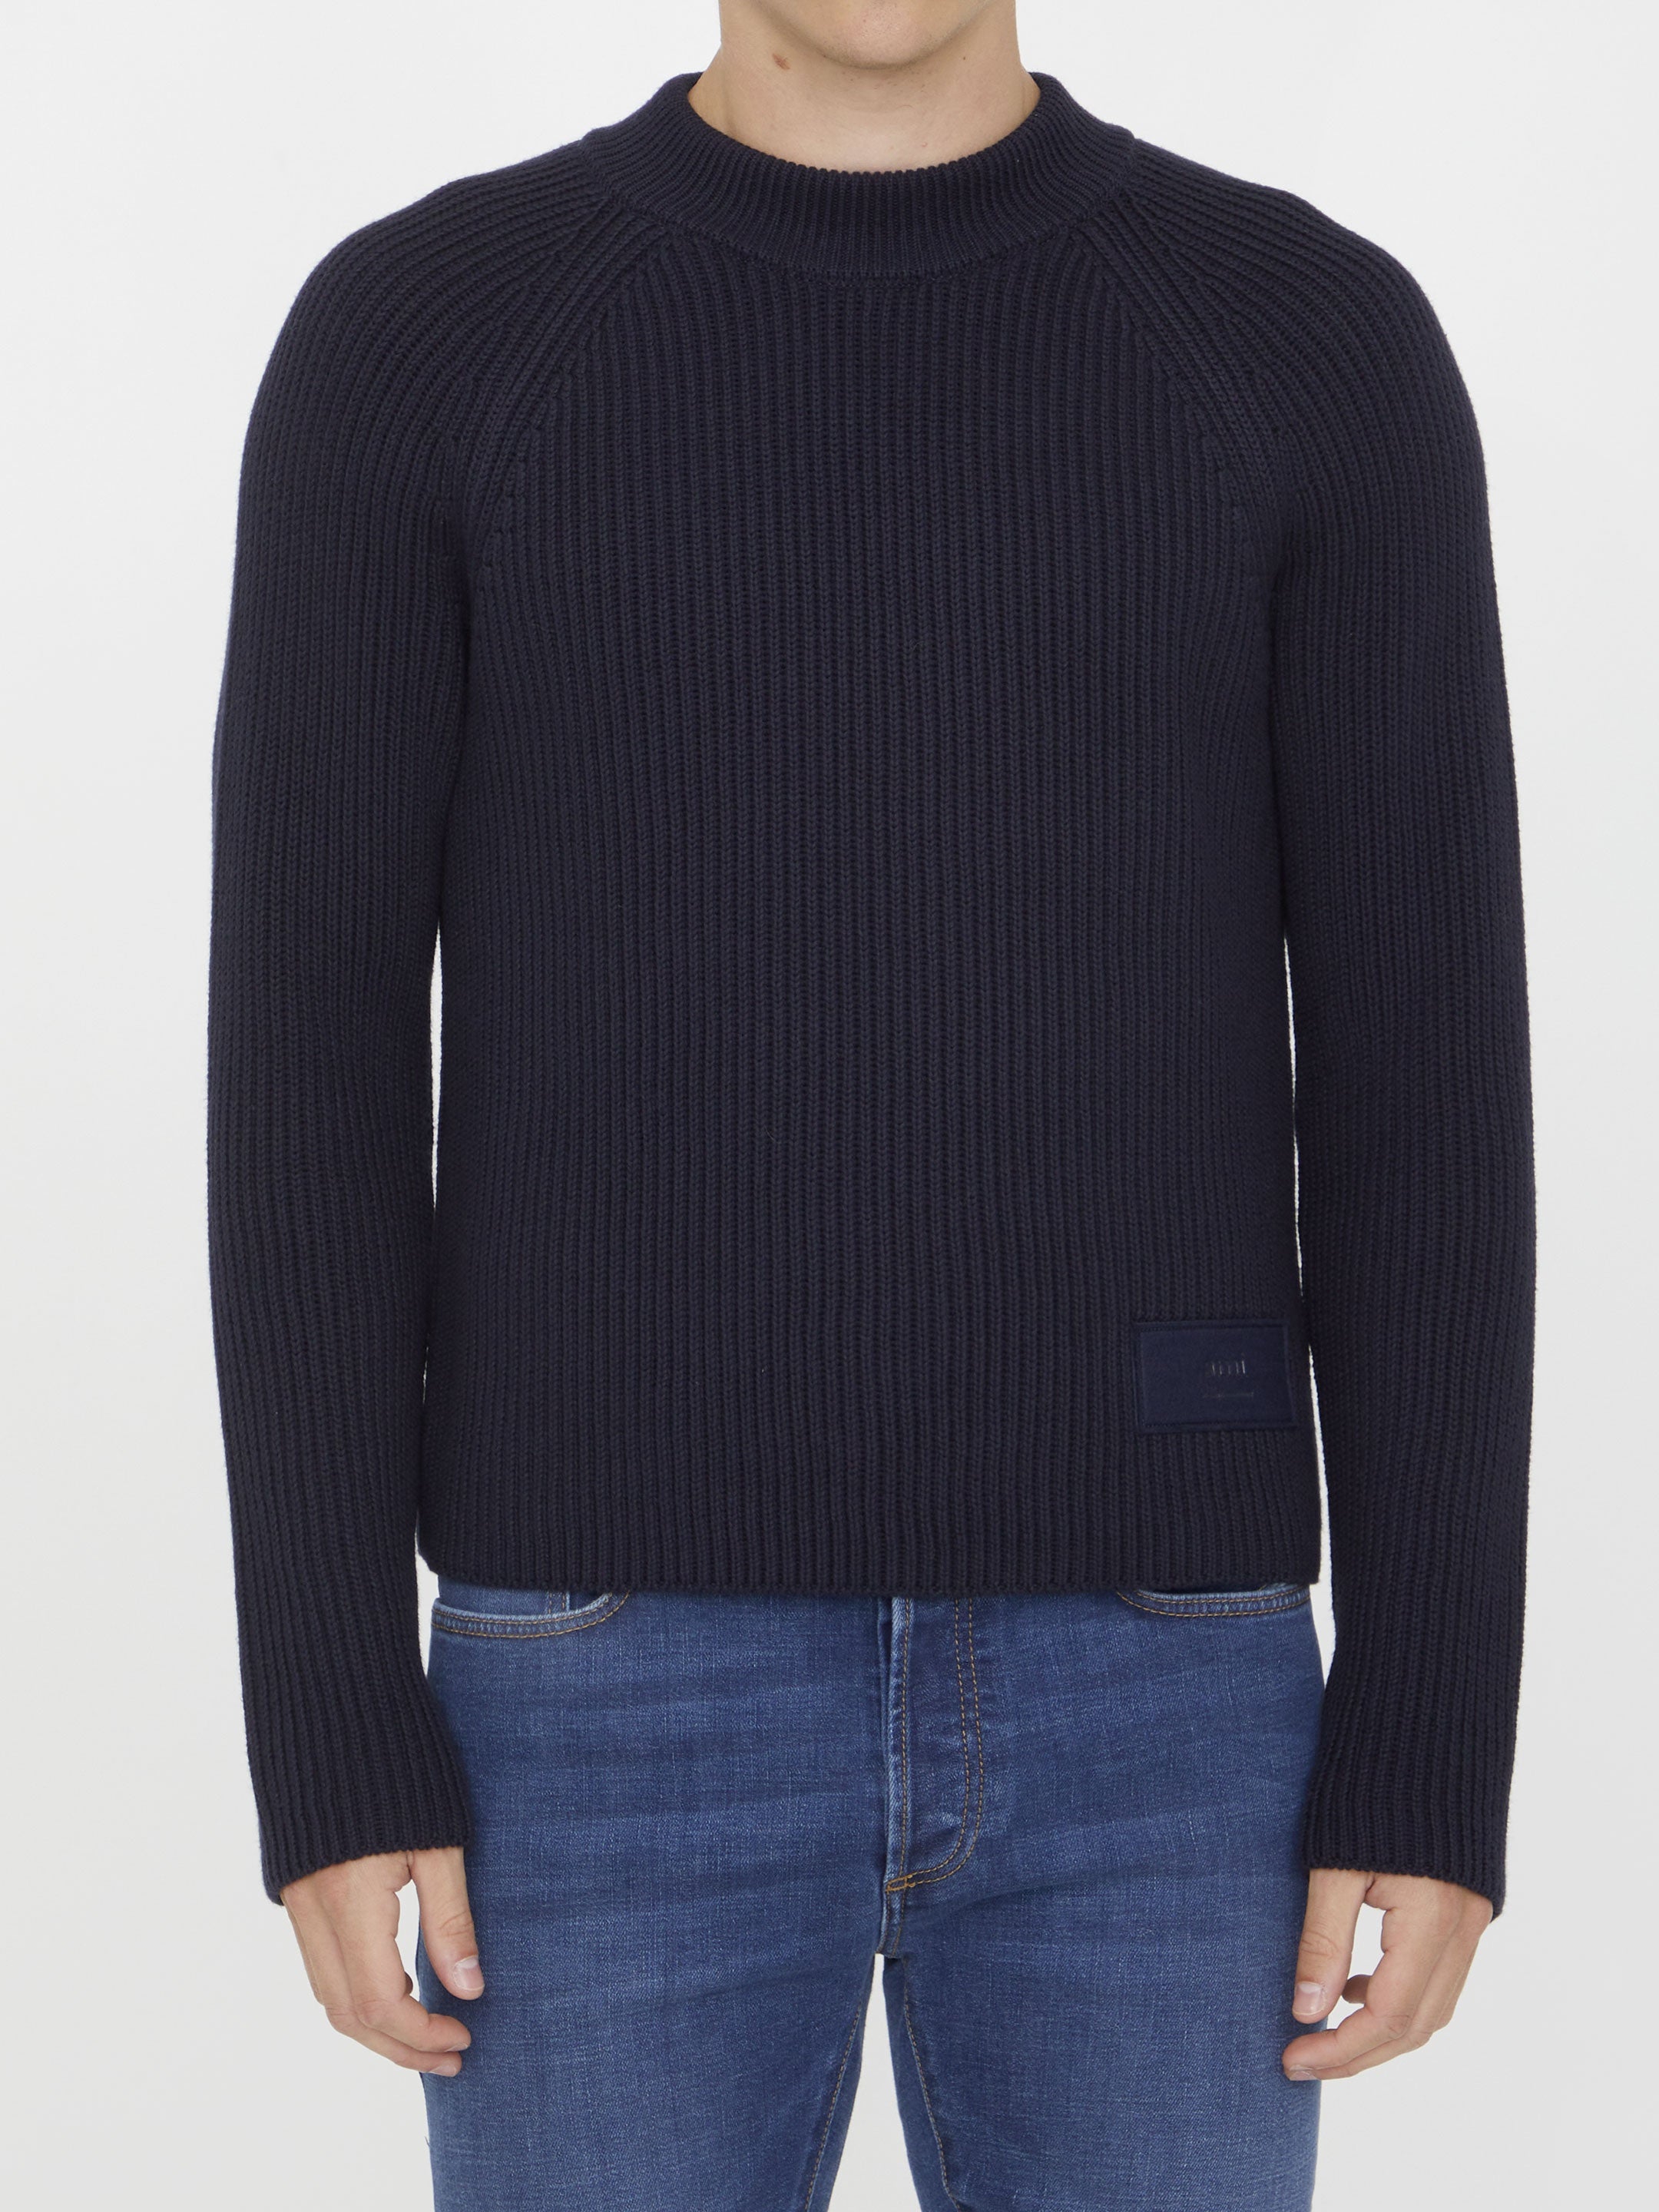 Blue jumper with patch